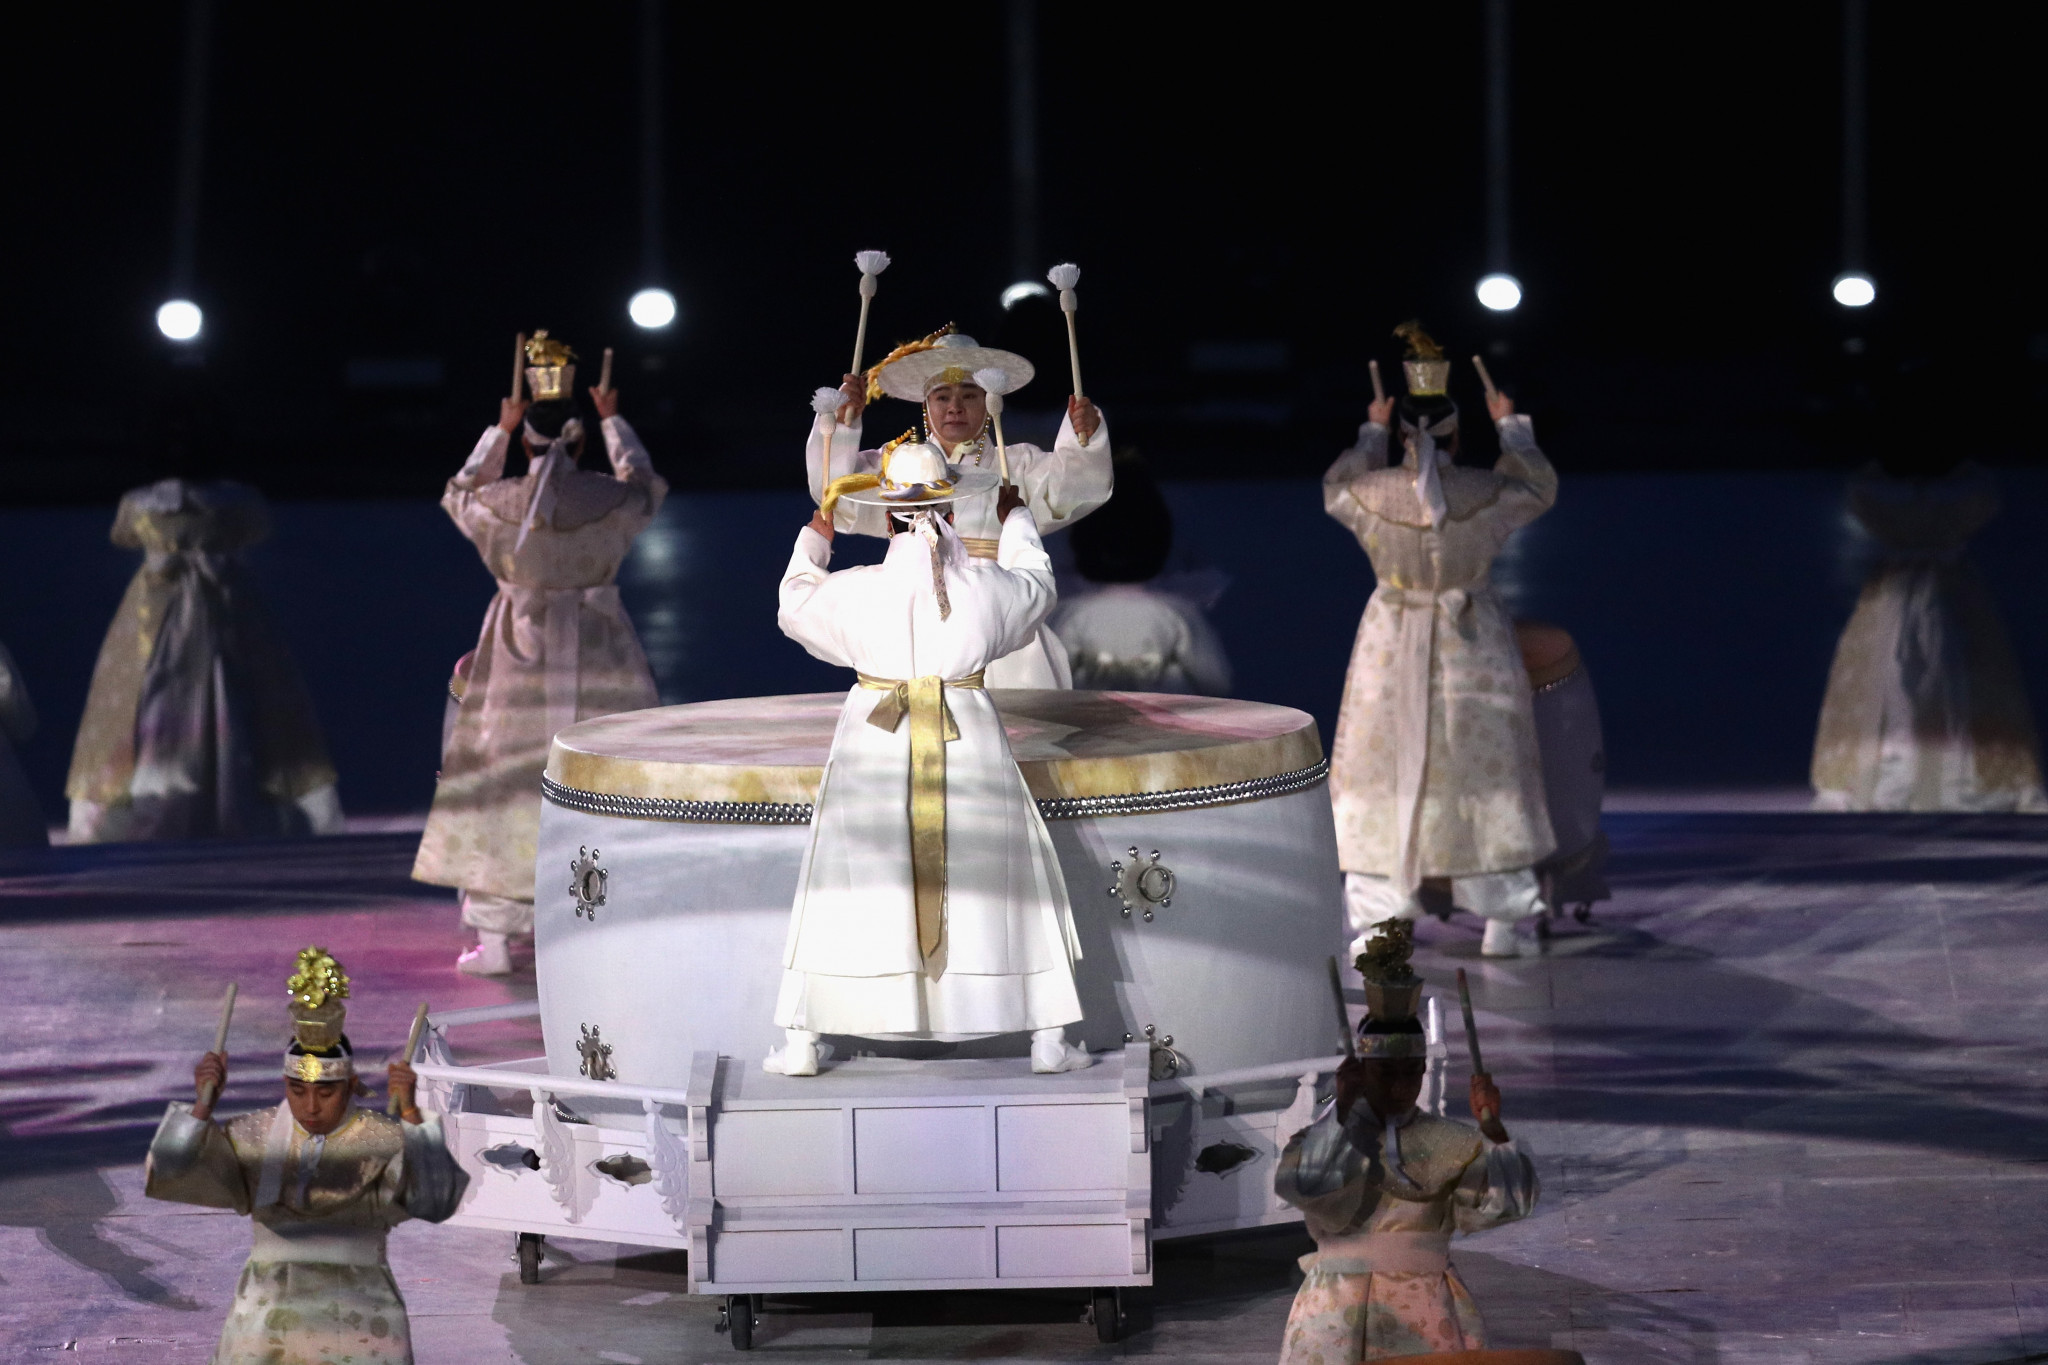 A thunderous drum performance got proceedings underway at the Pyeongchang Olympic Stadium ©Getty Images